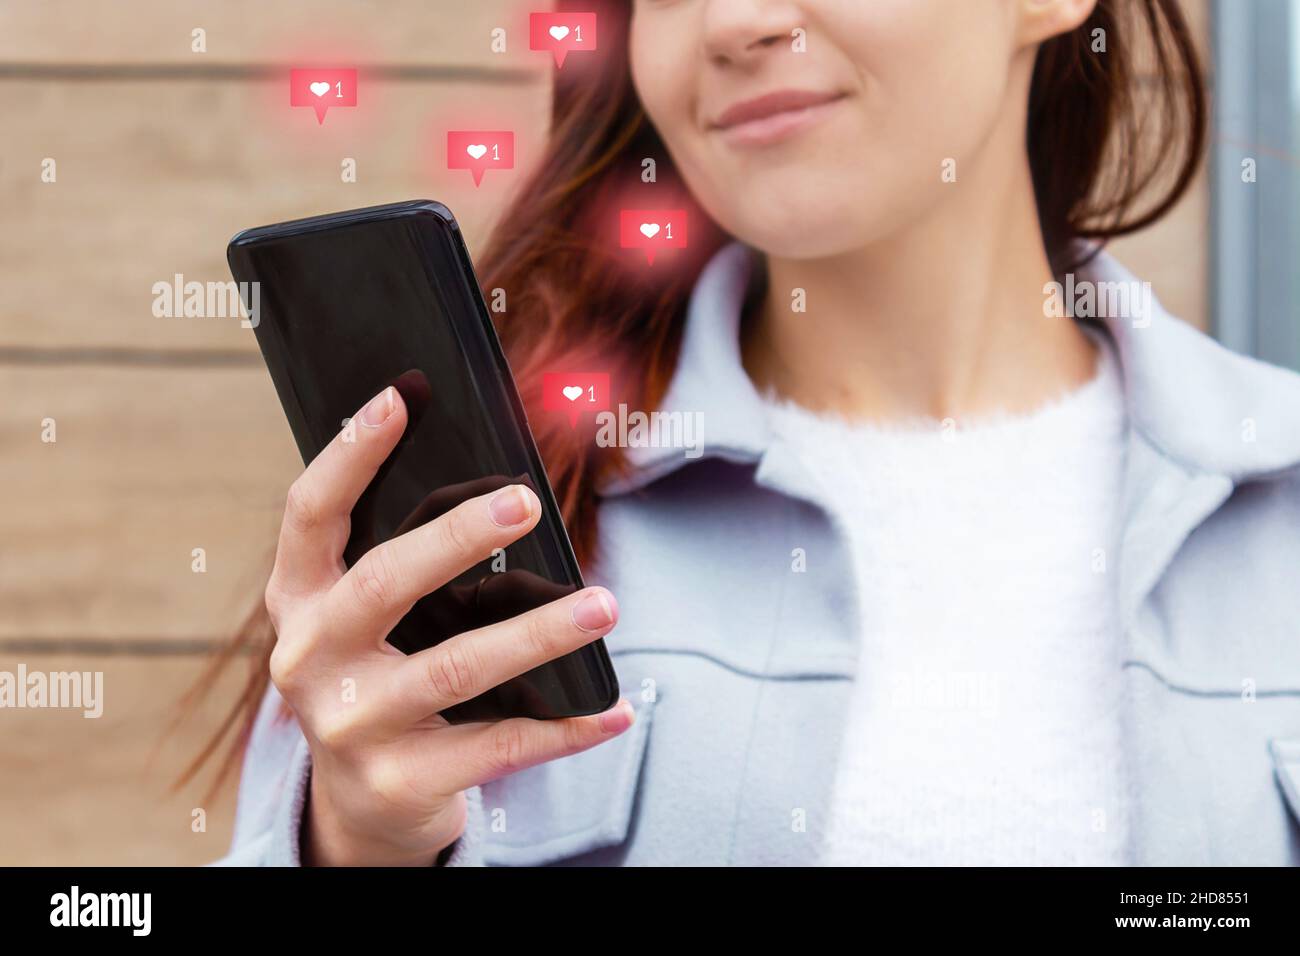 Likes from phone screen. Attractive young woman. Stock Photo